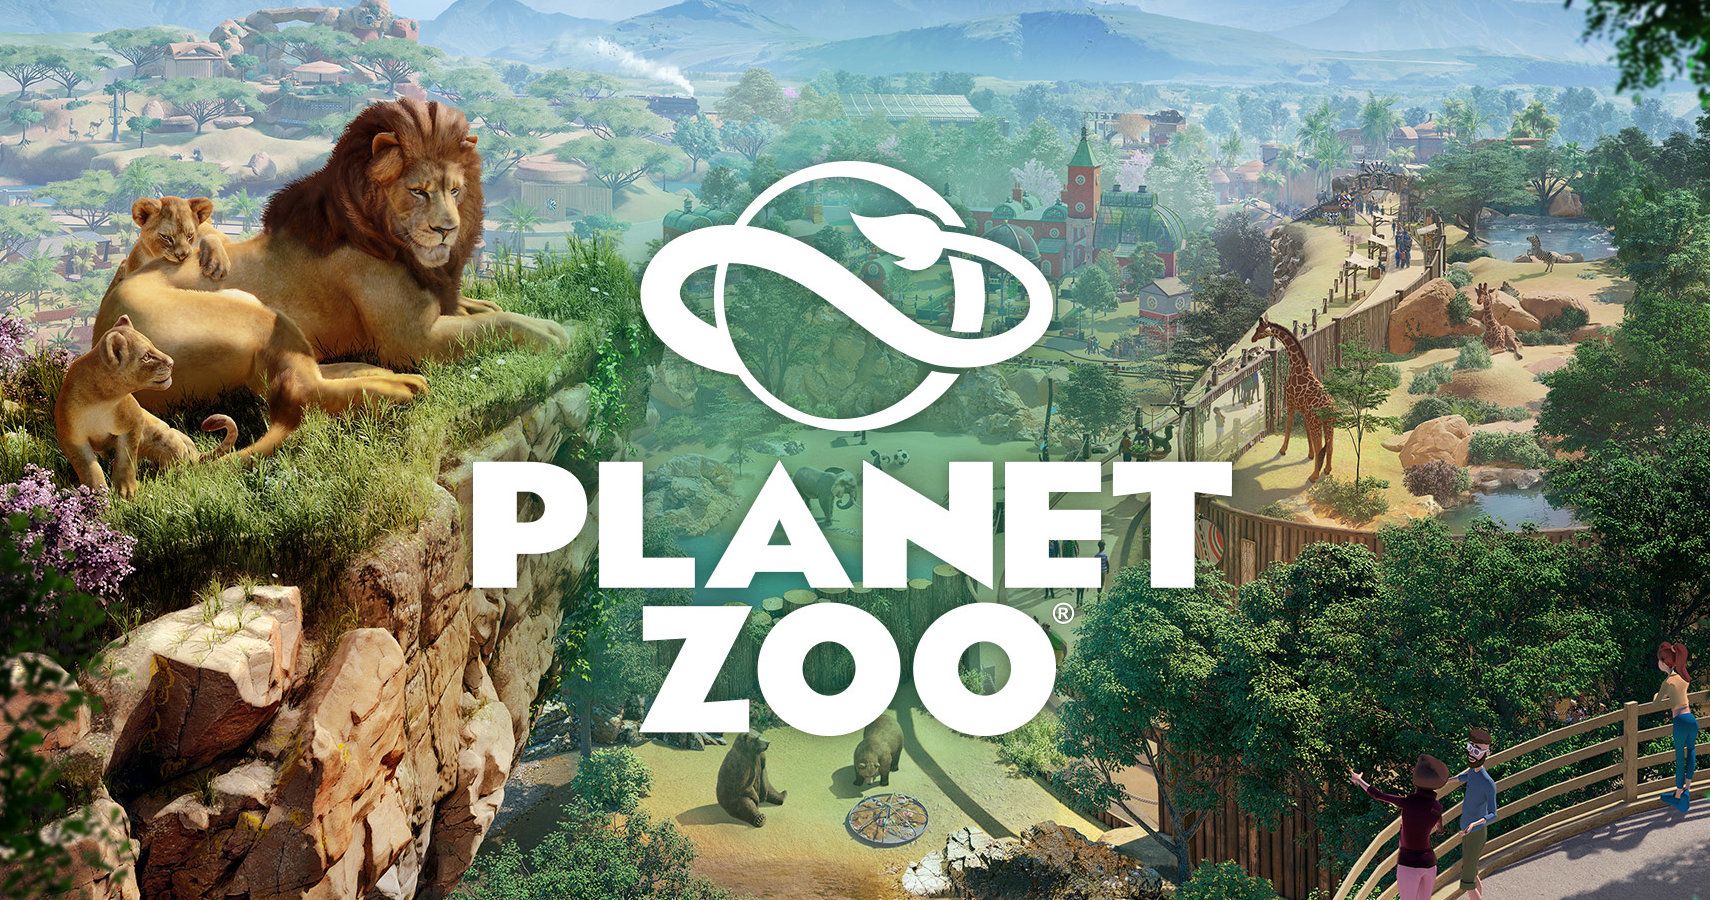 Planet Zoo logo on an image of a zoo.